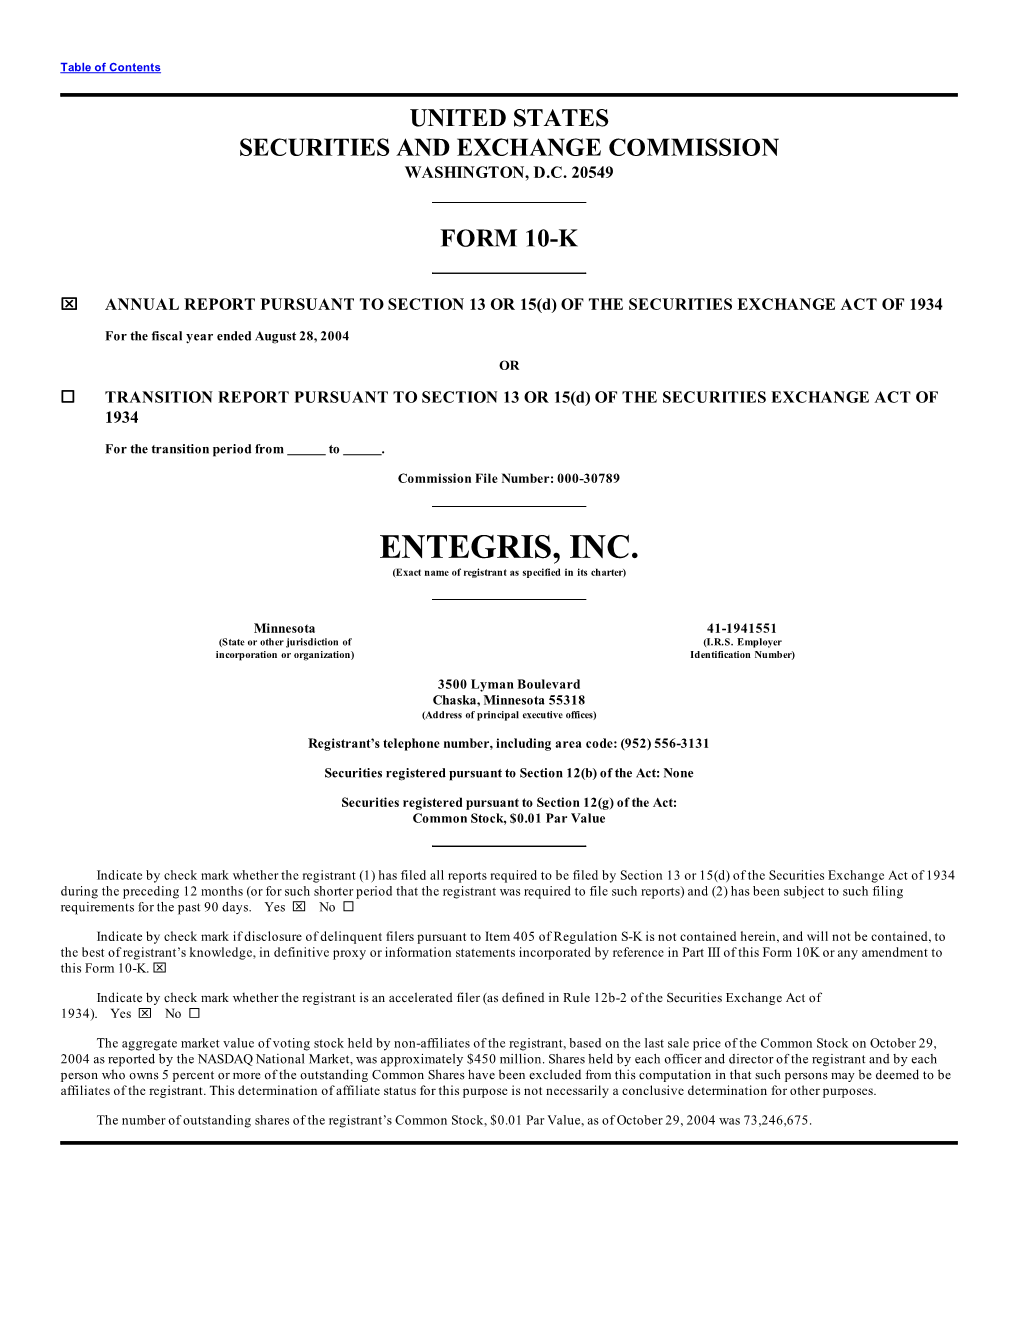 ENTEGRIS, INC. (Exact Name of Registrant As Specified in Its Charter)